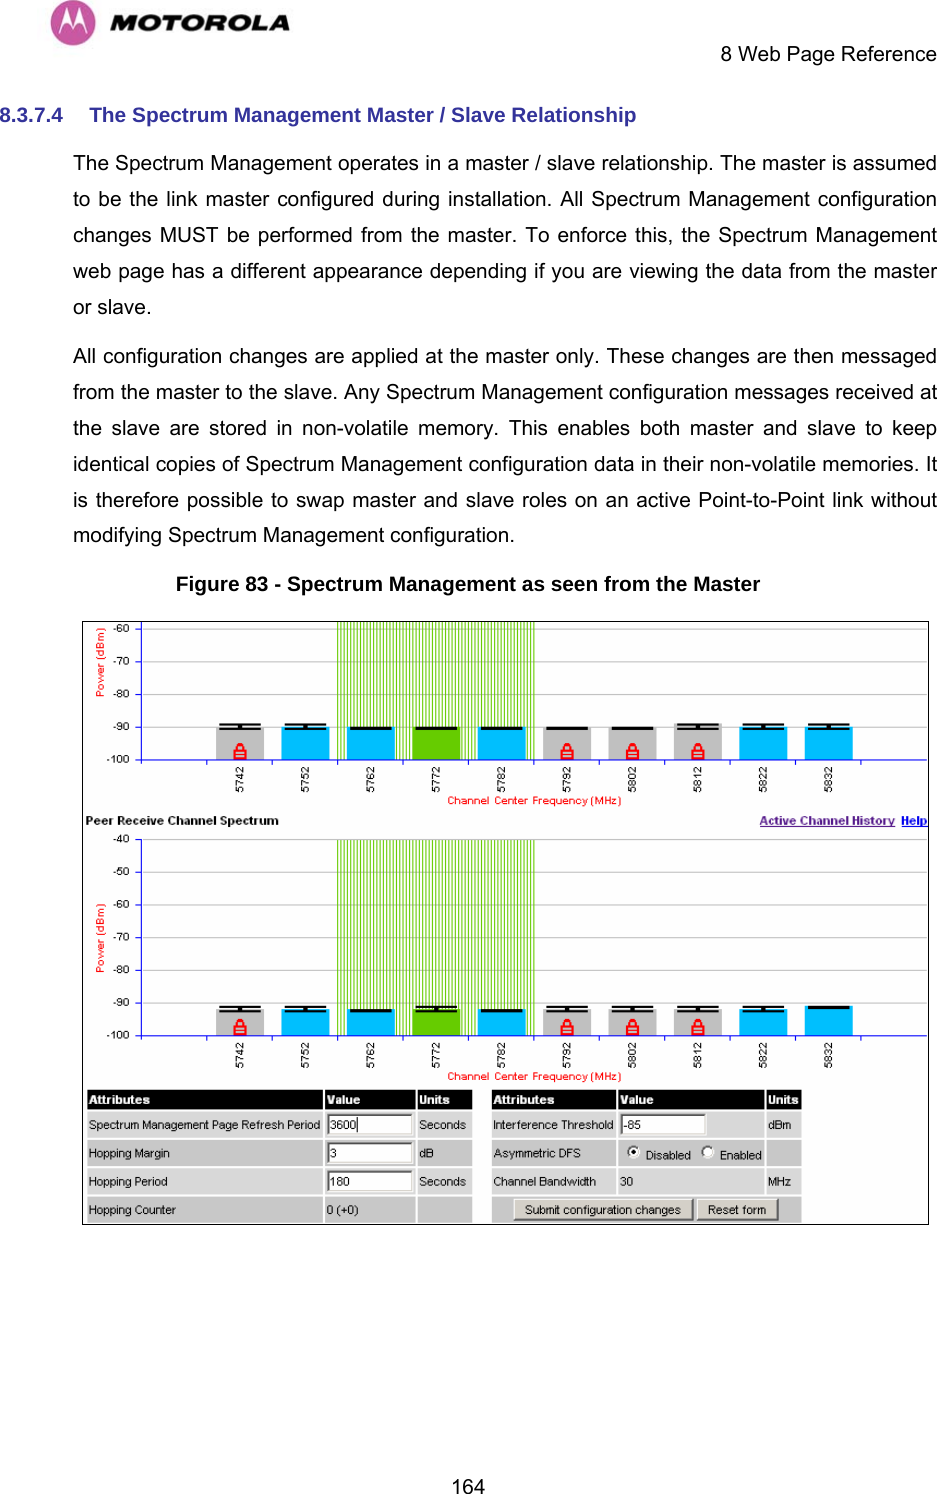     8 Web Page Reference  1648.3.7.4  The Spectrum Management Master / Slave Relationship The Spectrum Management operates in a master / slave relationship. The master is assumed to be the link master configured during installation. All Spectrum Management configuration changes MUST be performed from the master. To enforce this, the Spectrum Management web page has a different appearance depending if you are viewing the data from the master or slave. All configuration changes are applied at the master only. These changes are then messaged from the master to the slave. Any Spectrum Management configuration messages received at the slave are stored in non-volatile memory. This enables both master and slave to keep identical copies of Spectrum Management configuration data in their non-volatile memories. It is therefore possible to swap master and slave roles on an active Point-to-Point link without modifying Spectrum Management configuration. Figure 83 - Spectrum Management as seen from the Master  